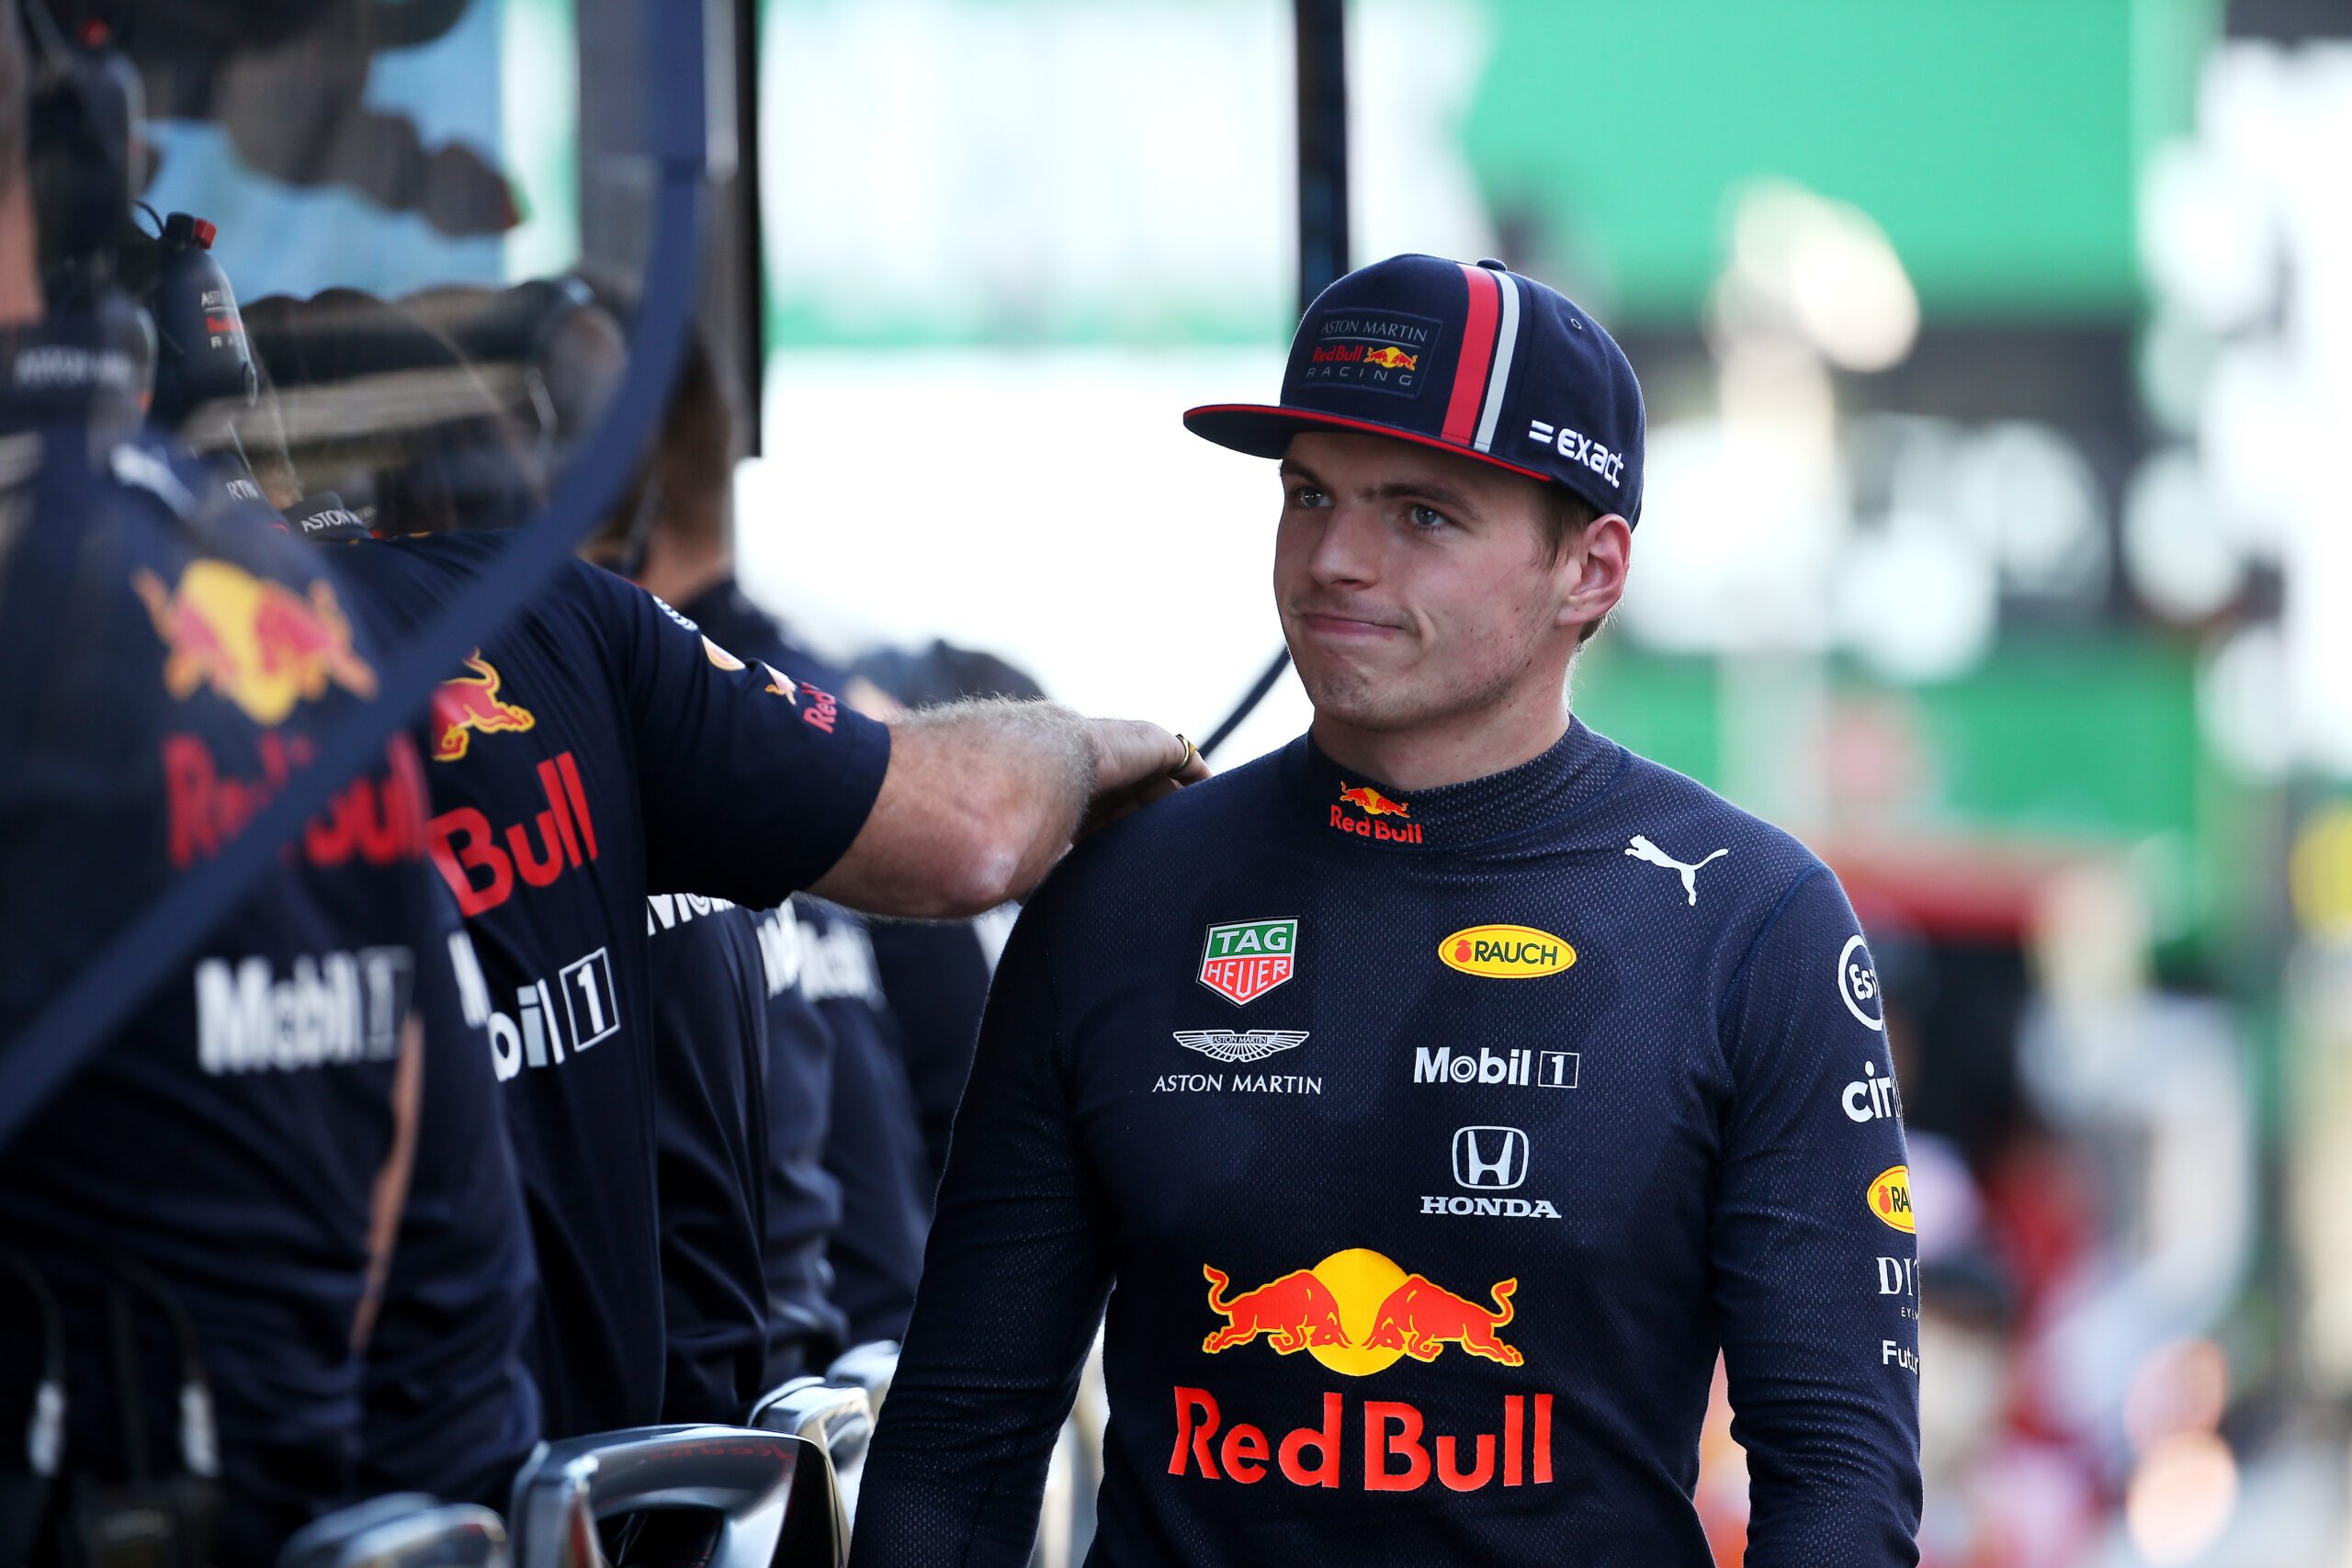 SUZUKA,JAPAN,13.OCT.19 - MOTORSPORTS, FORMULA 1 - Grand Prix of Japan, Suzuka International Racing Course. Image shows Max Verstappen (NED/ Red Bull Racing). Photo: GEPA pictures/ XPB Images/ Batchelor - ATTENTION - COPYRIGHT FOR AUSTRIAN CLIENTS ONLY